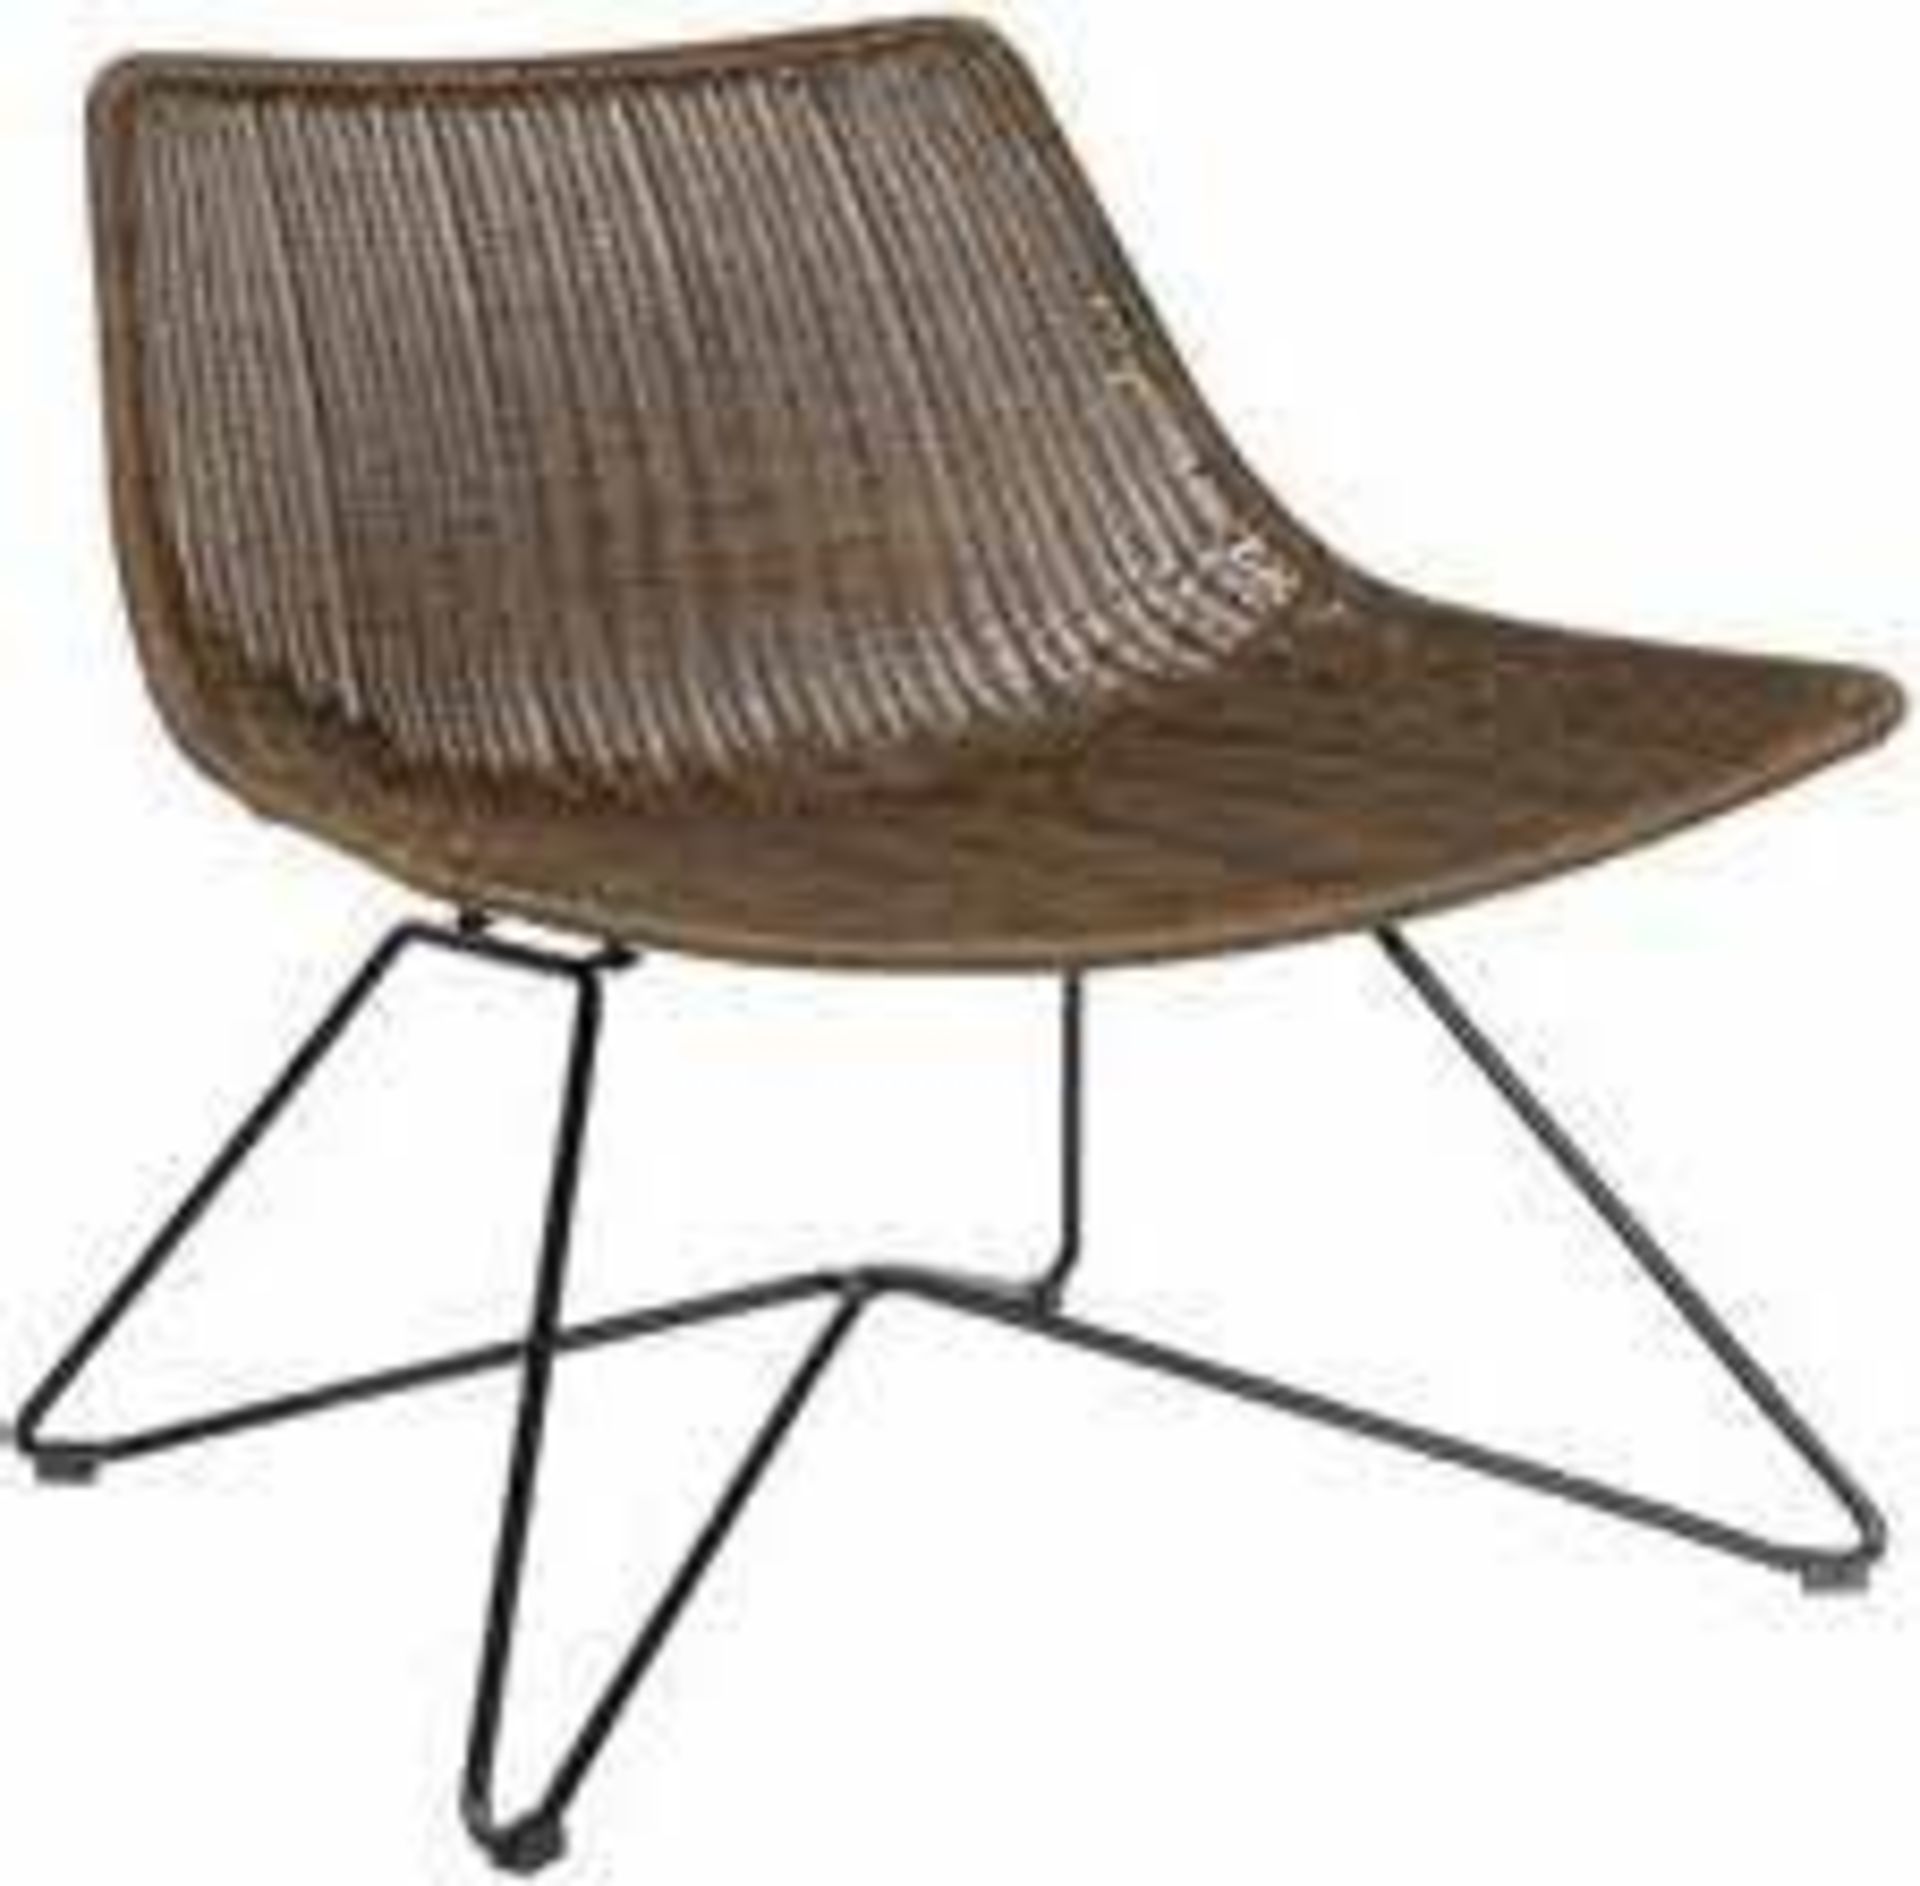 1 x WOOOD Designs 'OTIS' Indoor / Outdoor Chair In BROWN With Metal Base - Dimensions: H77.5 x W65 x